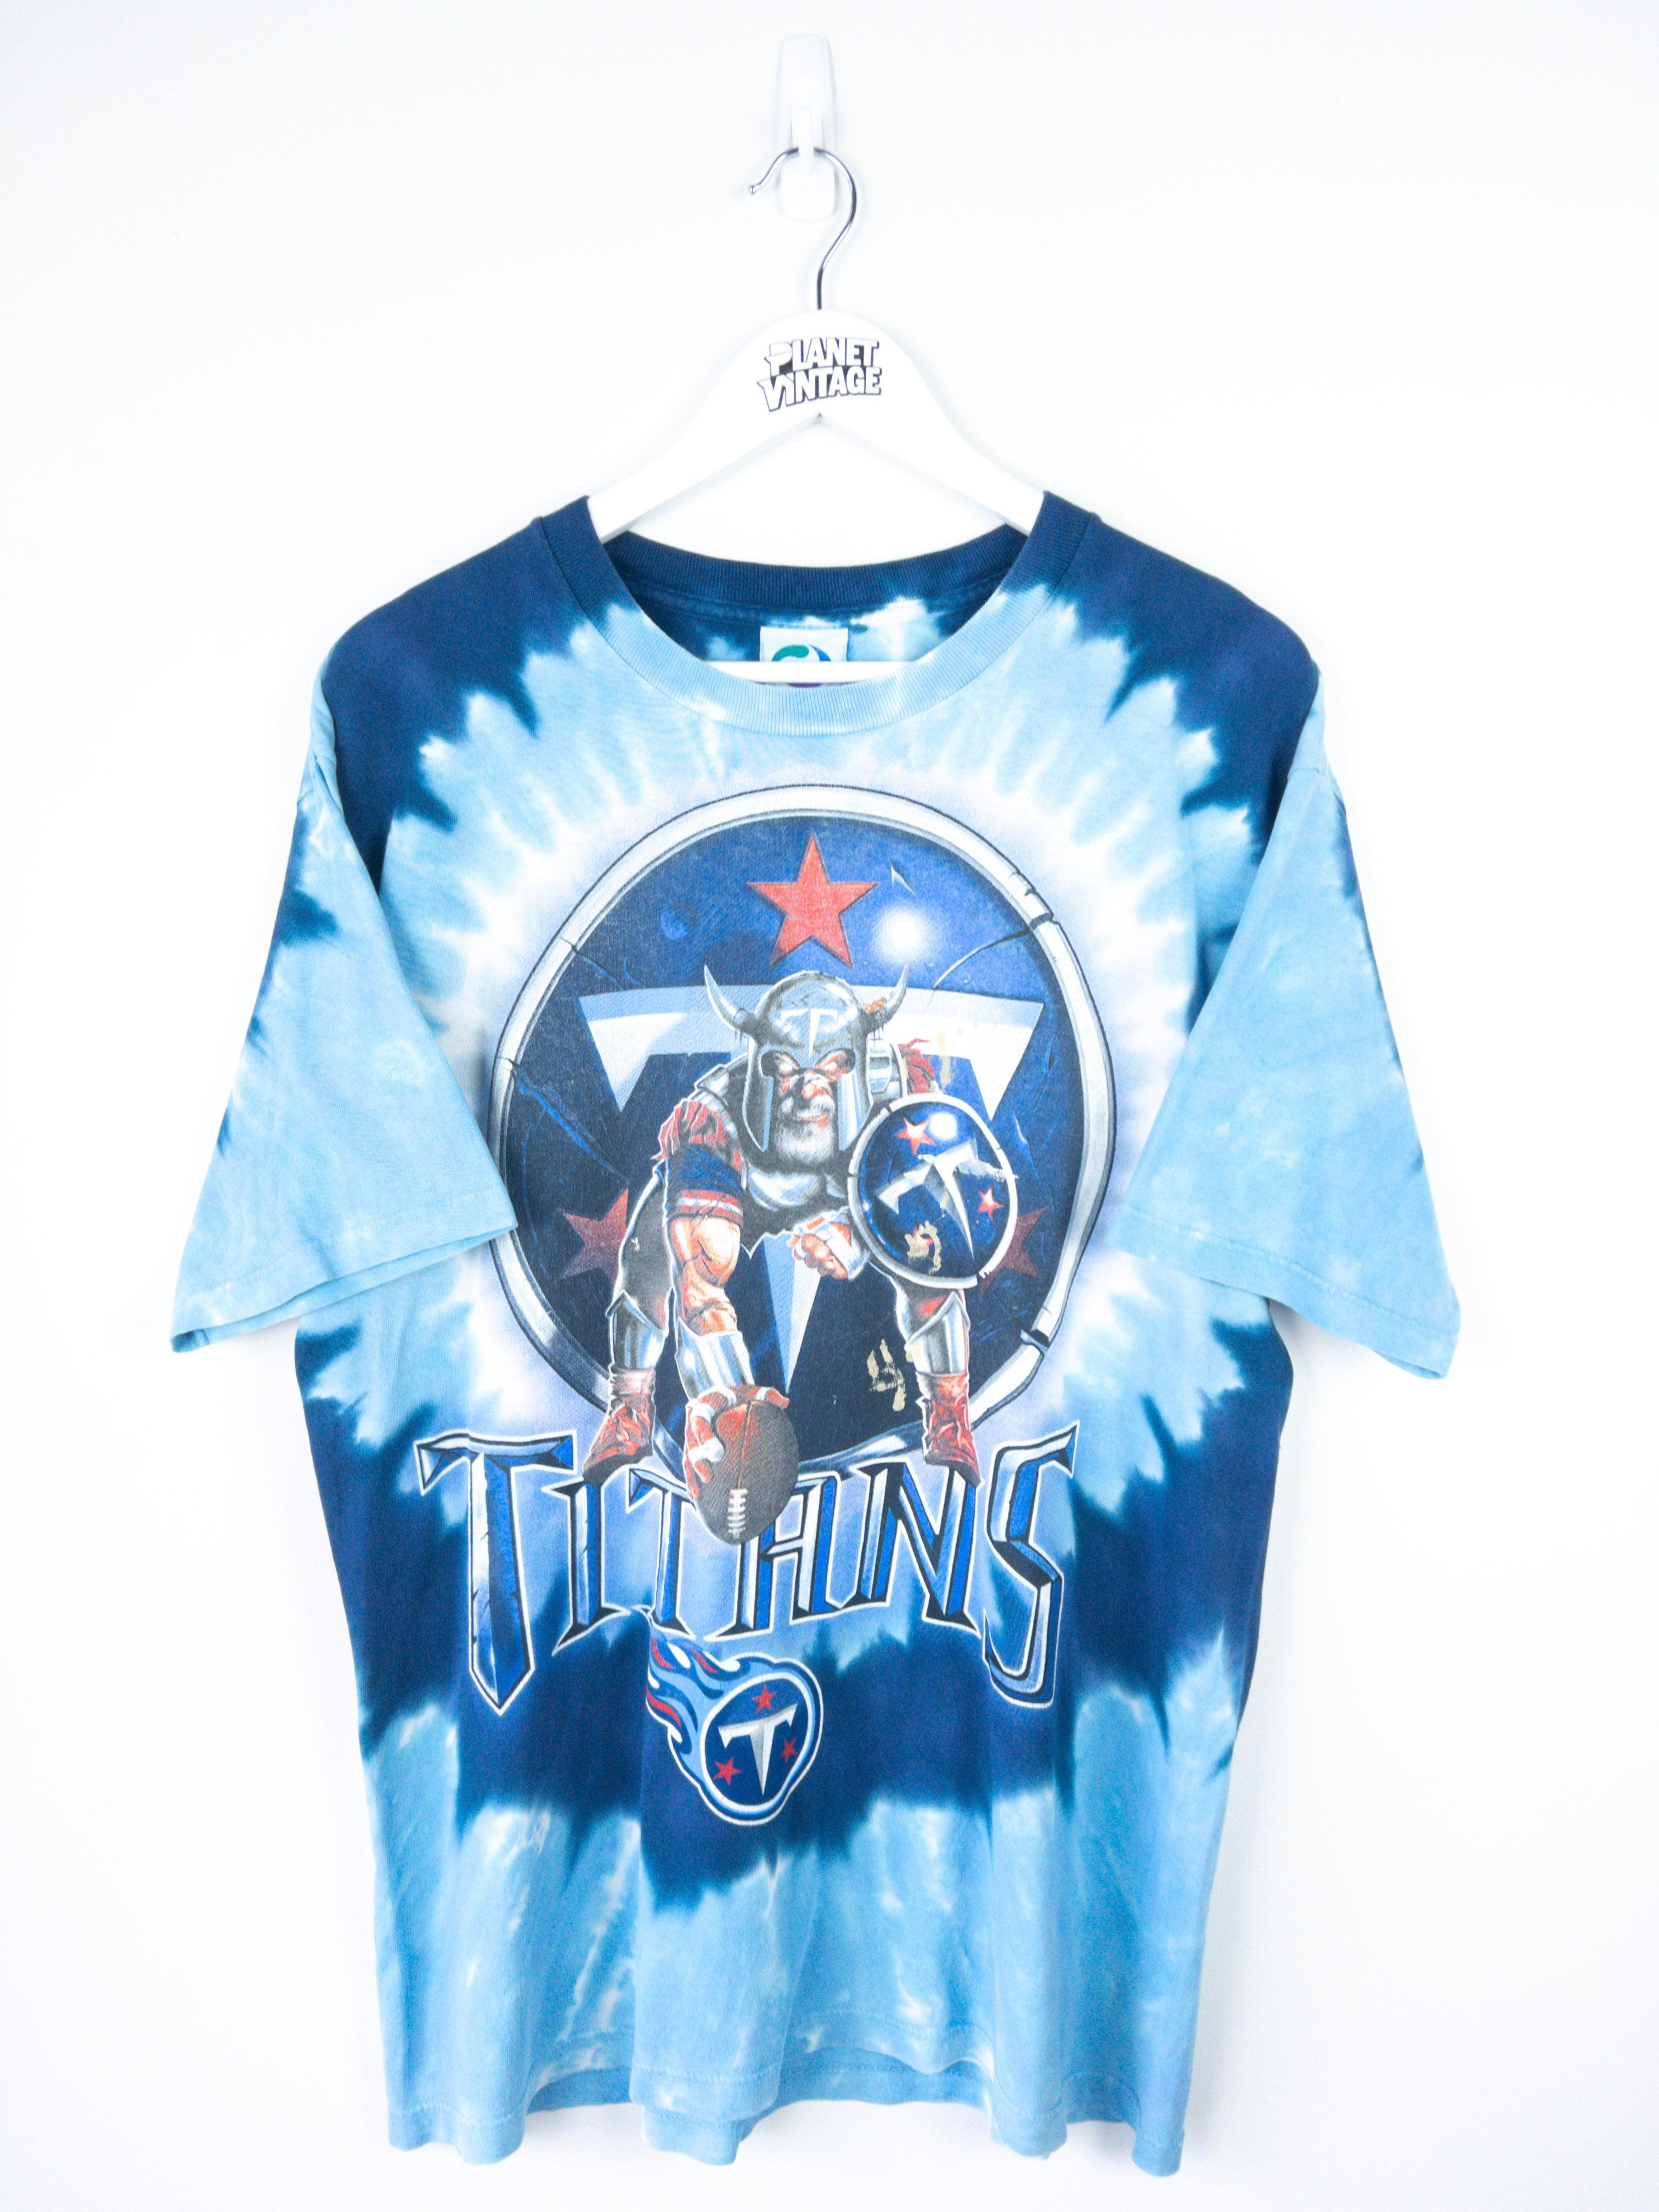 Tennessee Titans Tie-Dye Tee (XL) - Planet Vintage Store